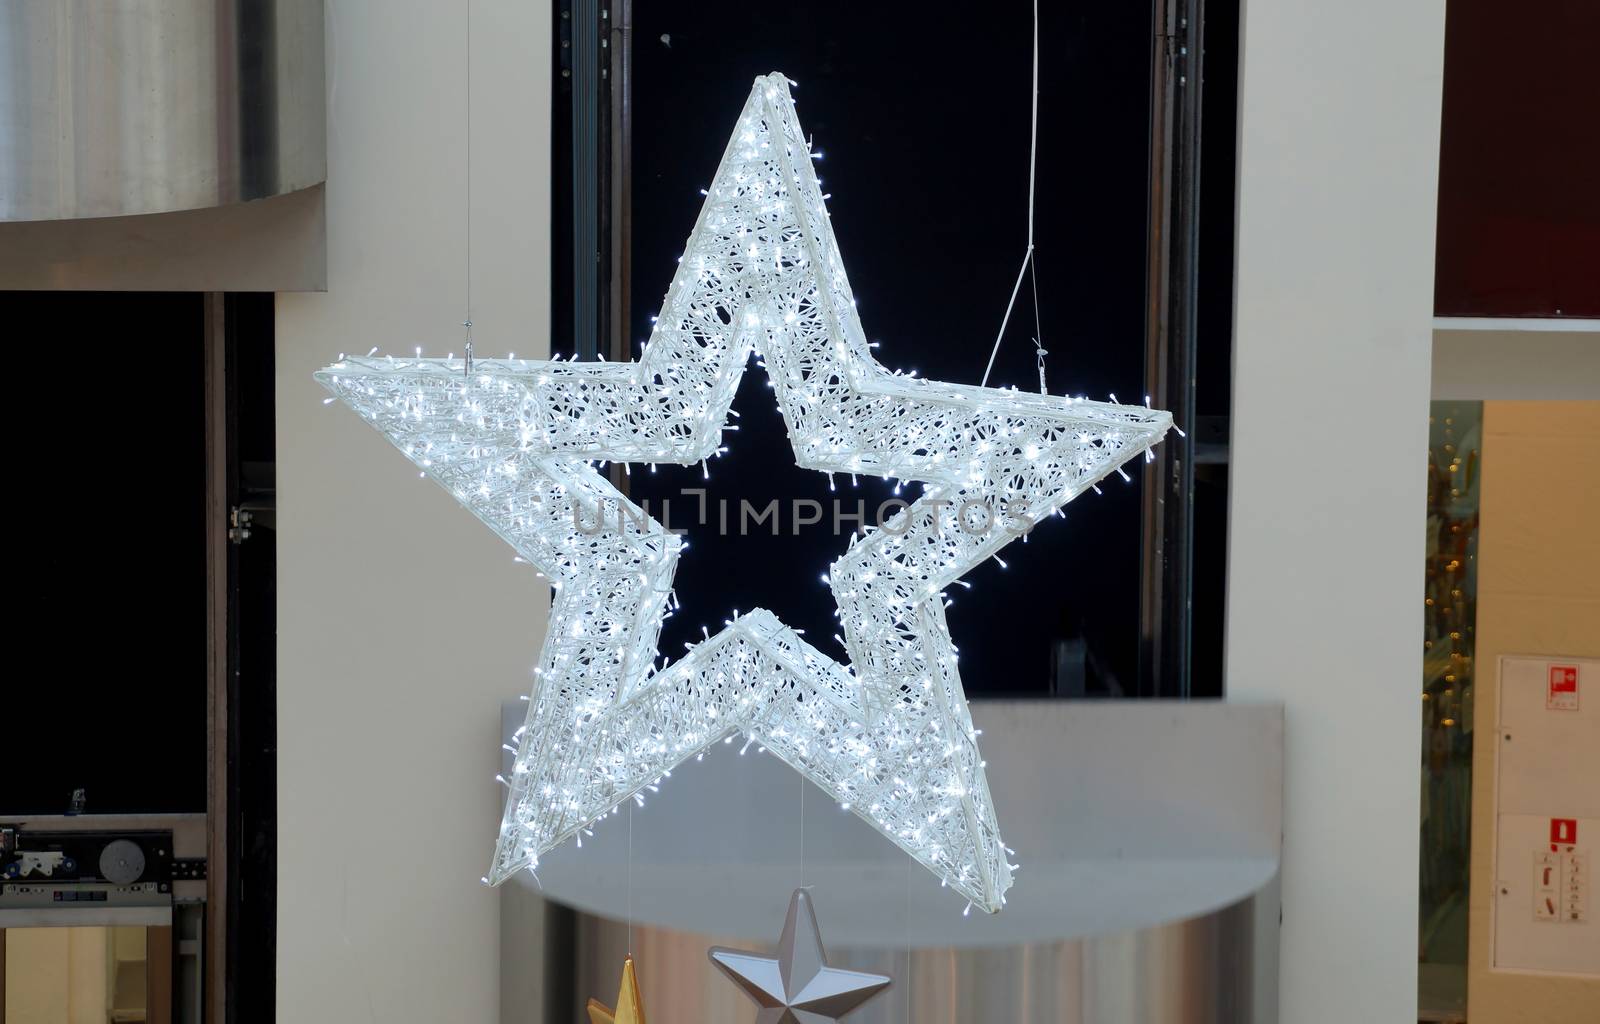 Suspended garland in the form of a star by Vadimdem